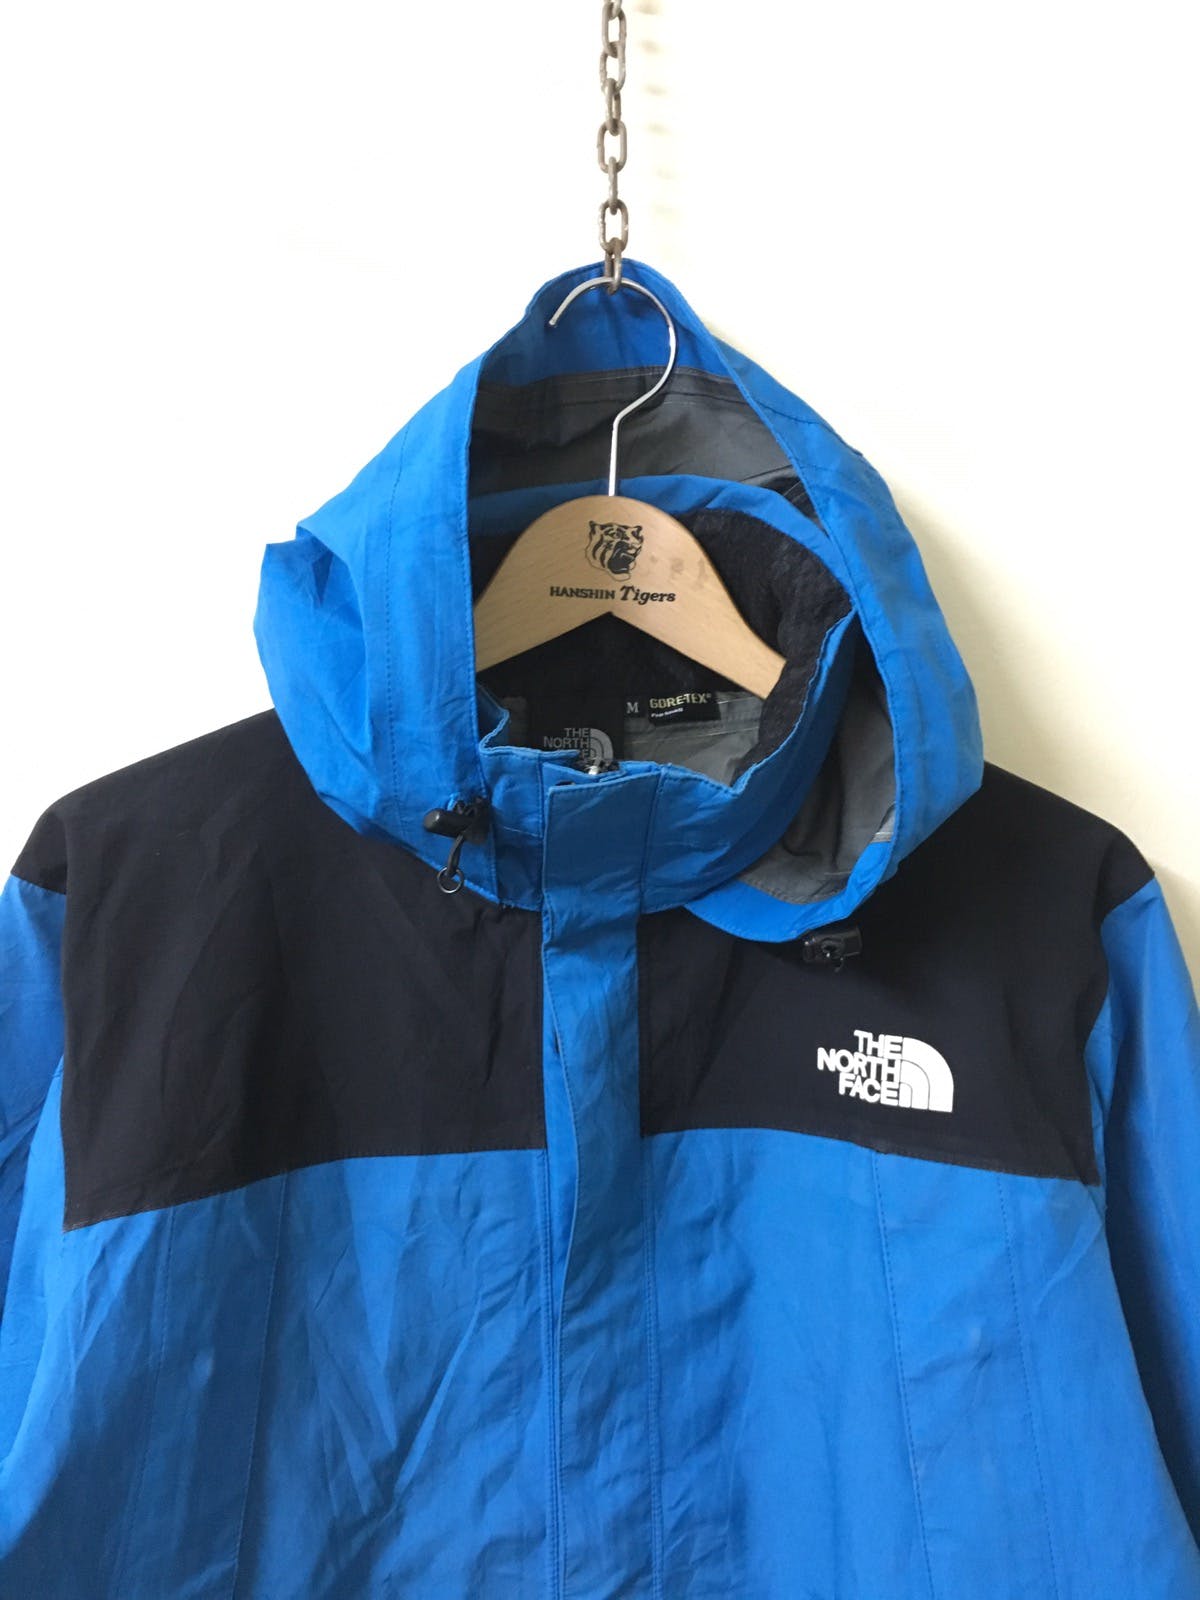 The north face lockof Gore-Tex Pro Shell - 6